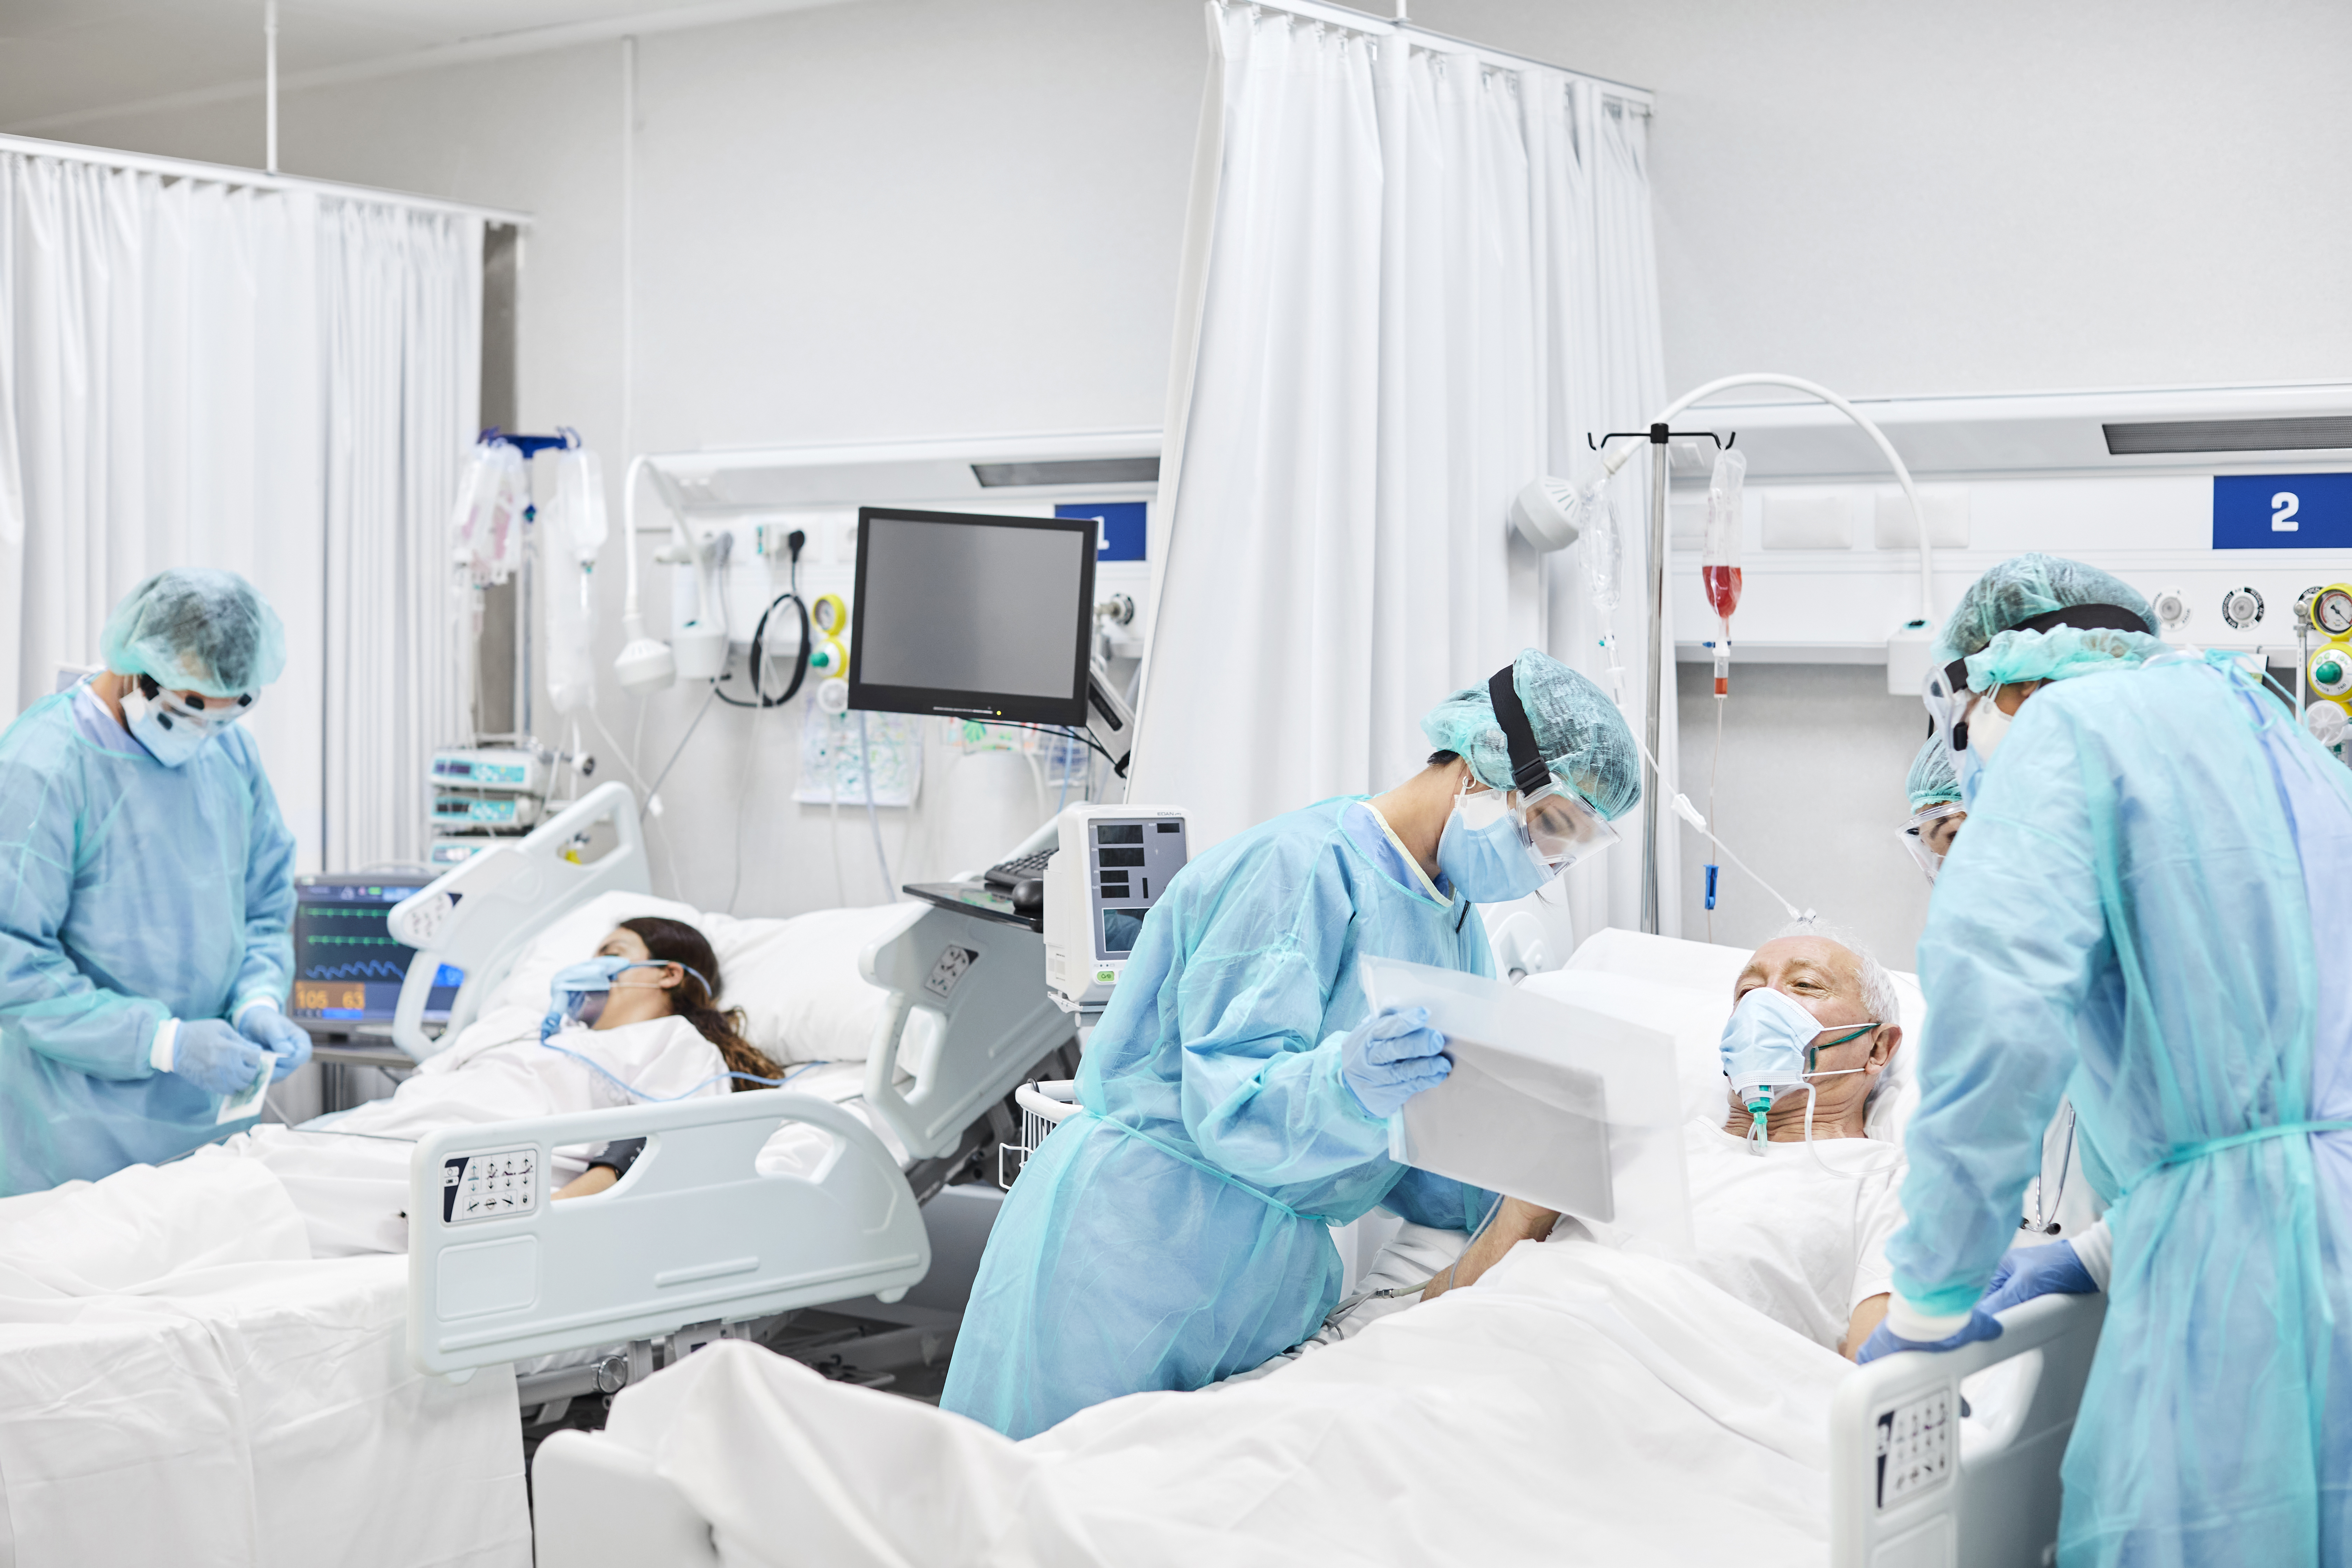 WellAir devices protect the ICU